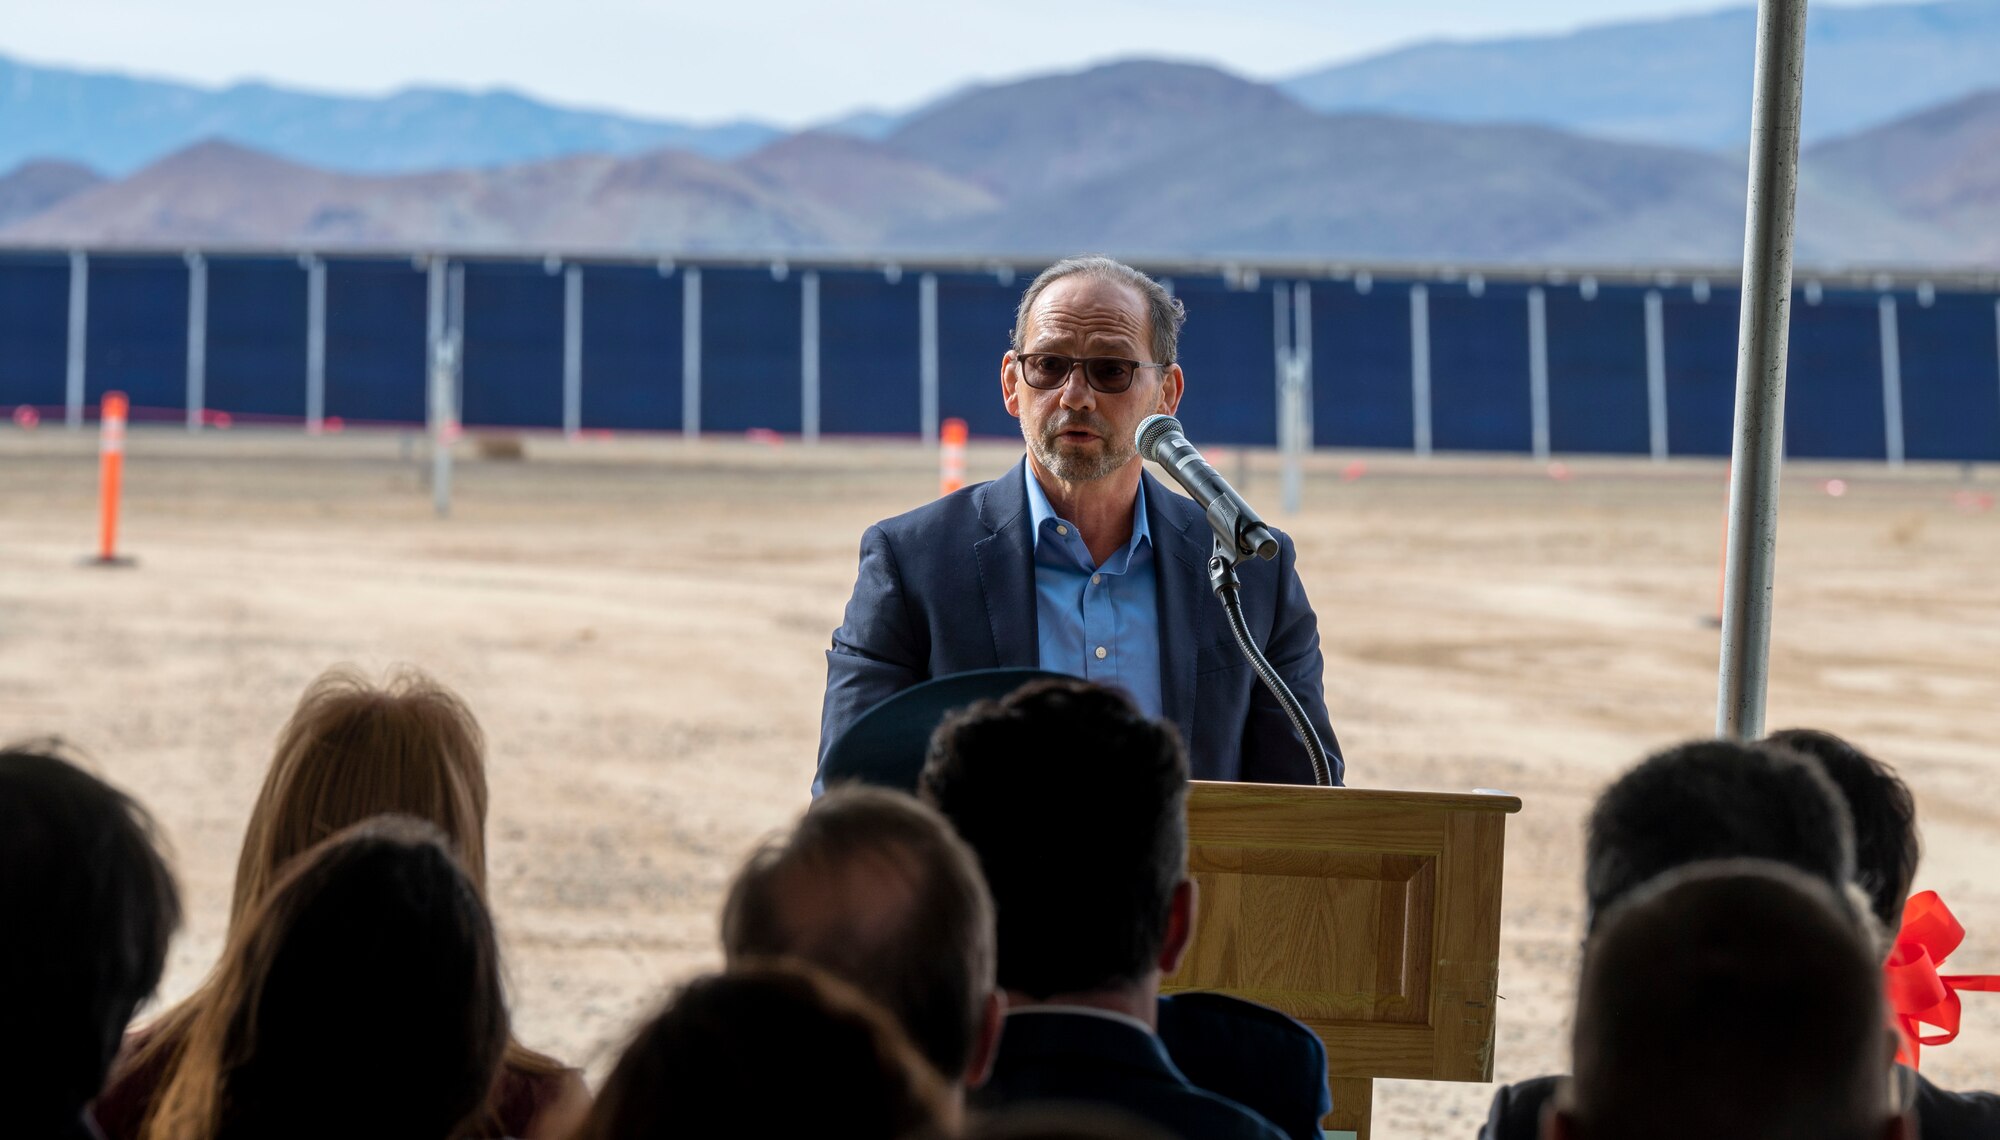 James R. Pagano, Chief Executive Officer, Terra-Gen LLC, speaks at the Edwards Solar Enhanced Use Lease Project ribbon cutting ceremony commemorating the largest private-public collaboration in Department of Defense history at Edwards Air Force Base, California, Feb. 2.